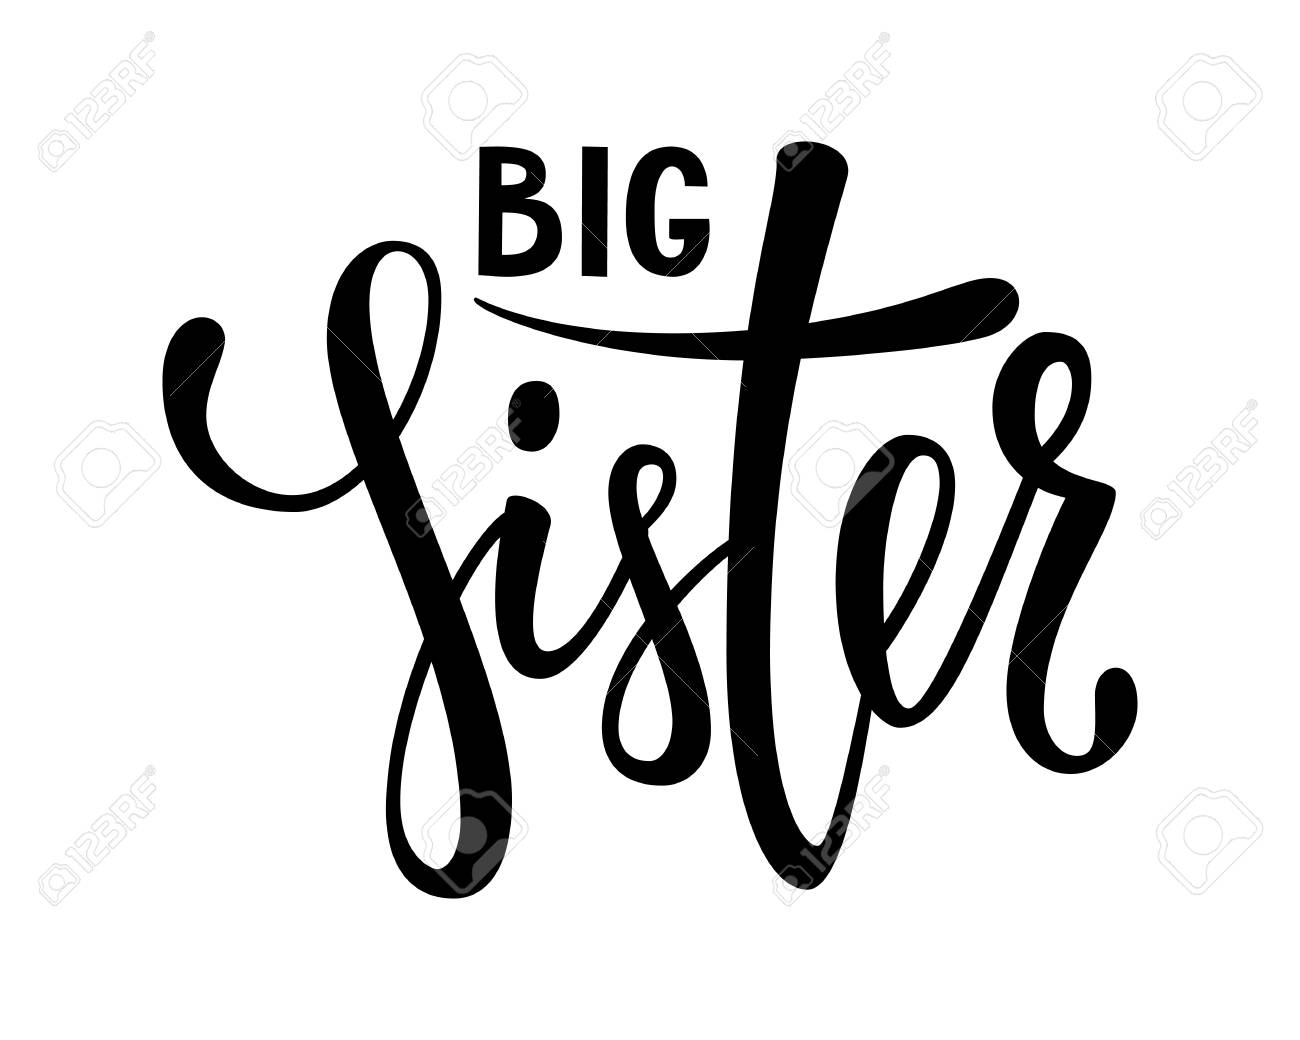 Big Sister Hand Drawn Calligraphy And Brush Pen Lettering On